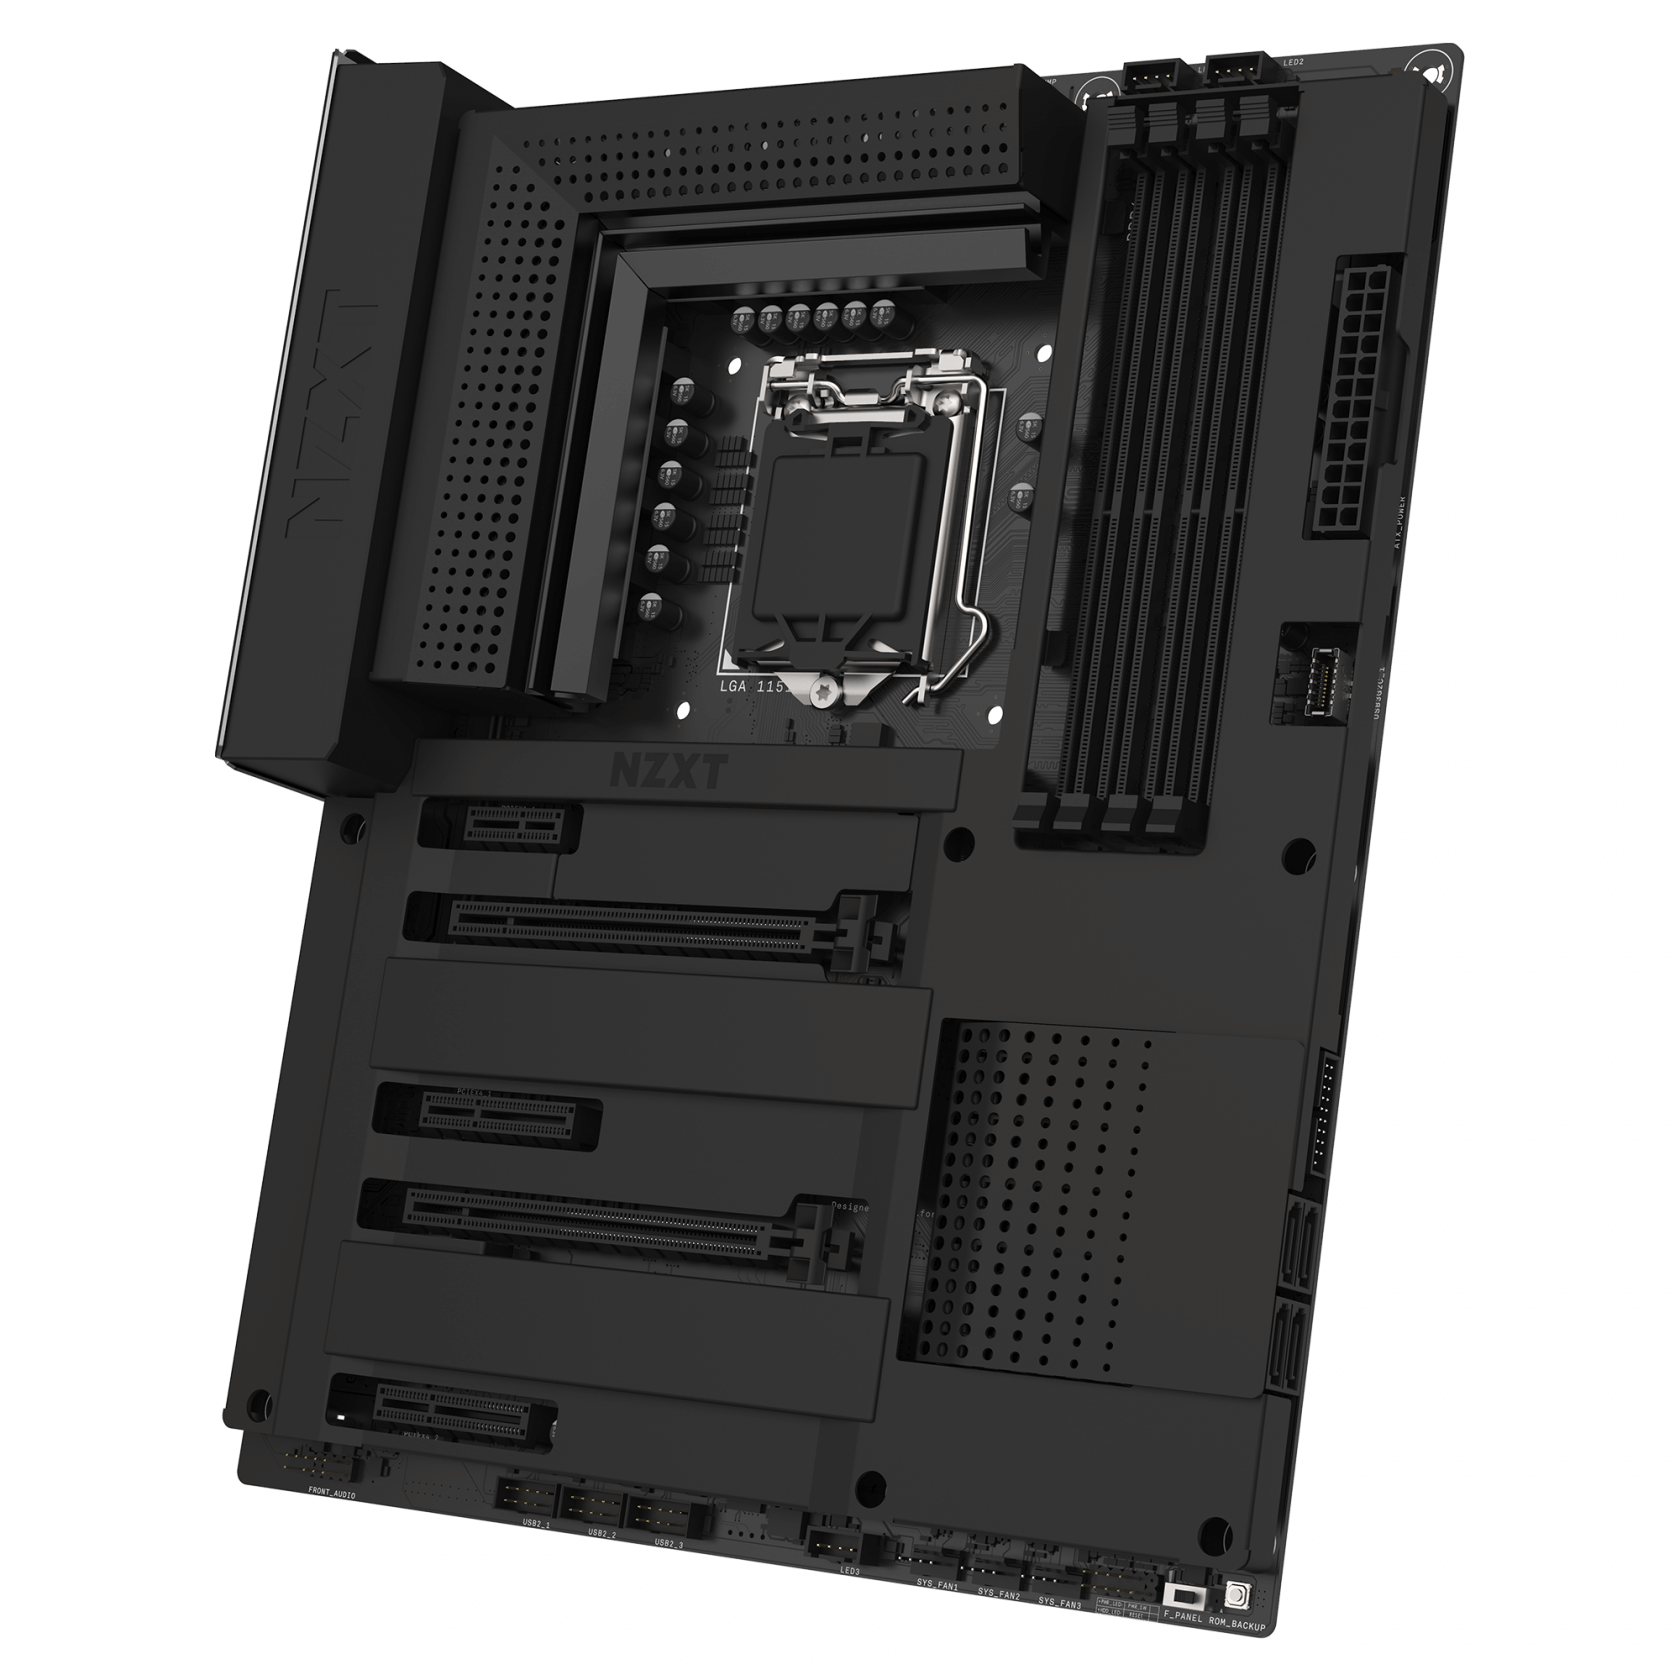 NZXT releases their second ever motherboard, the N7 Z390